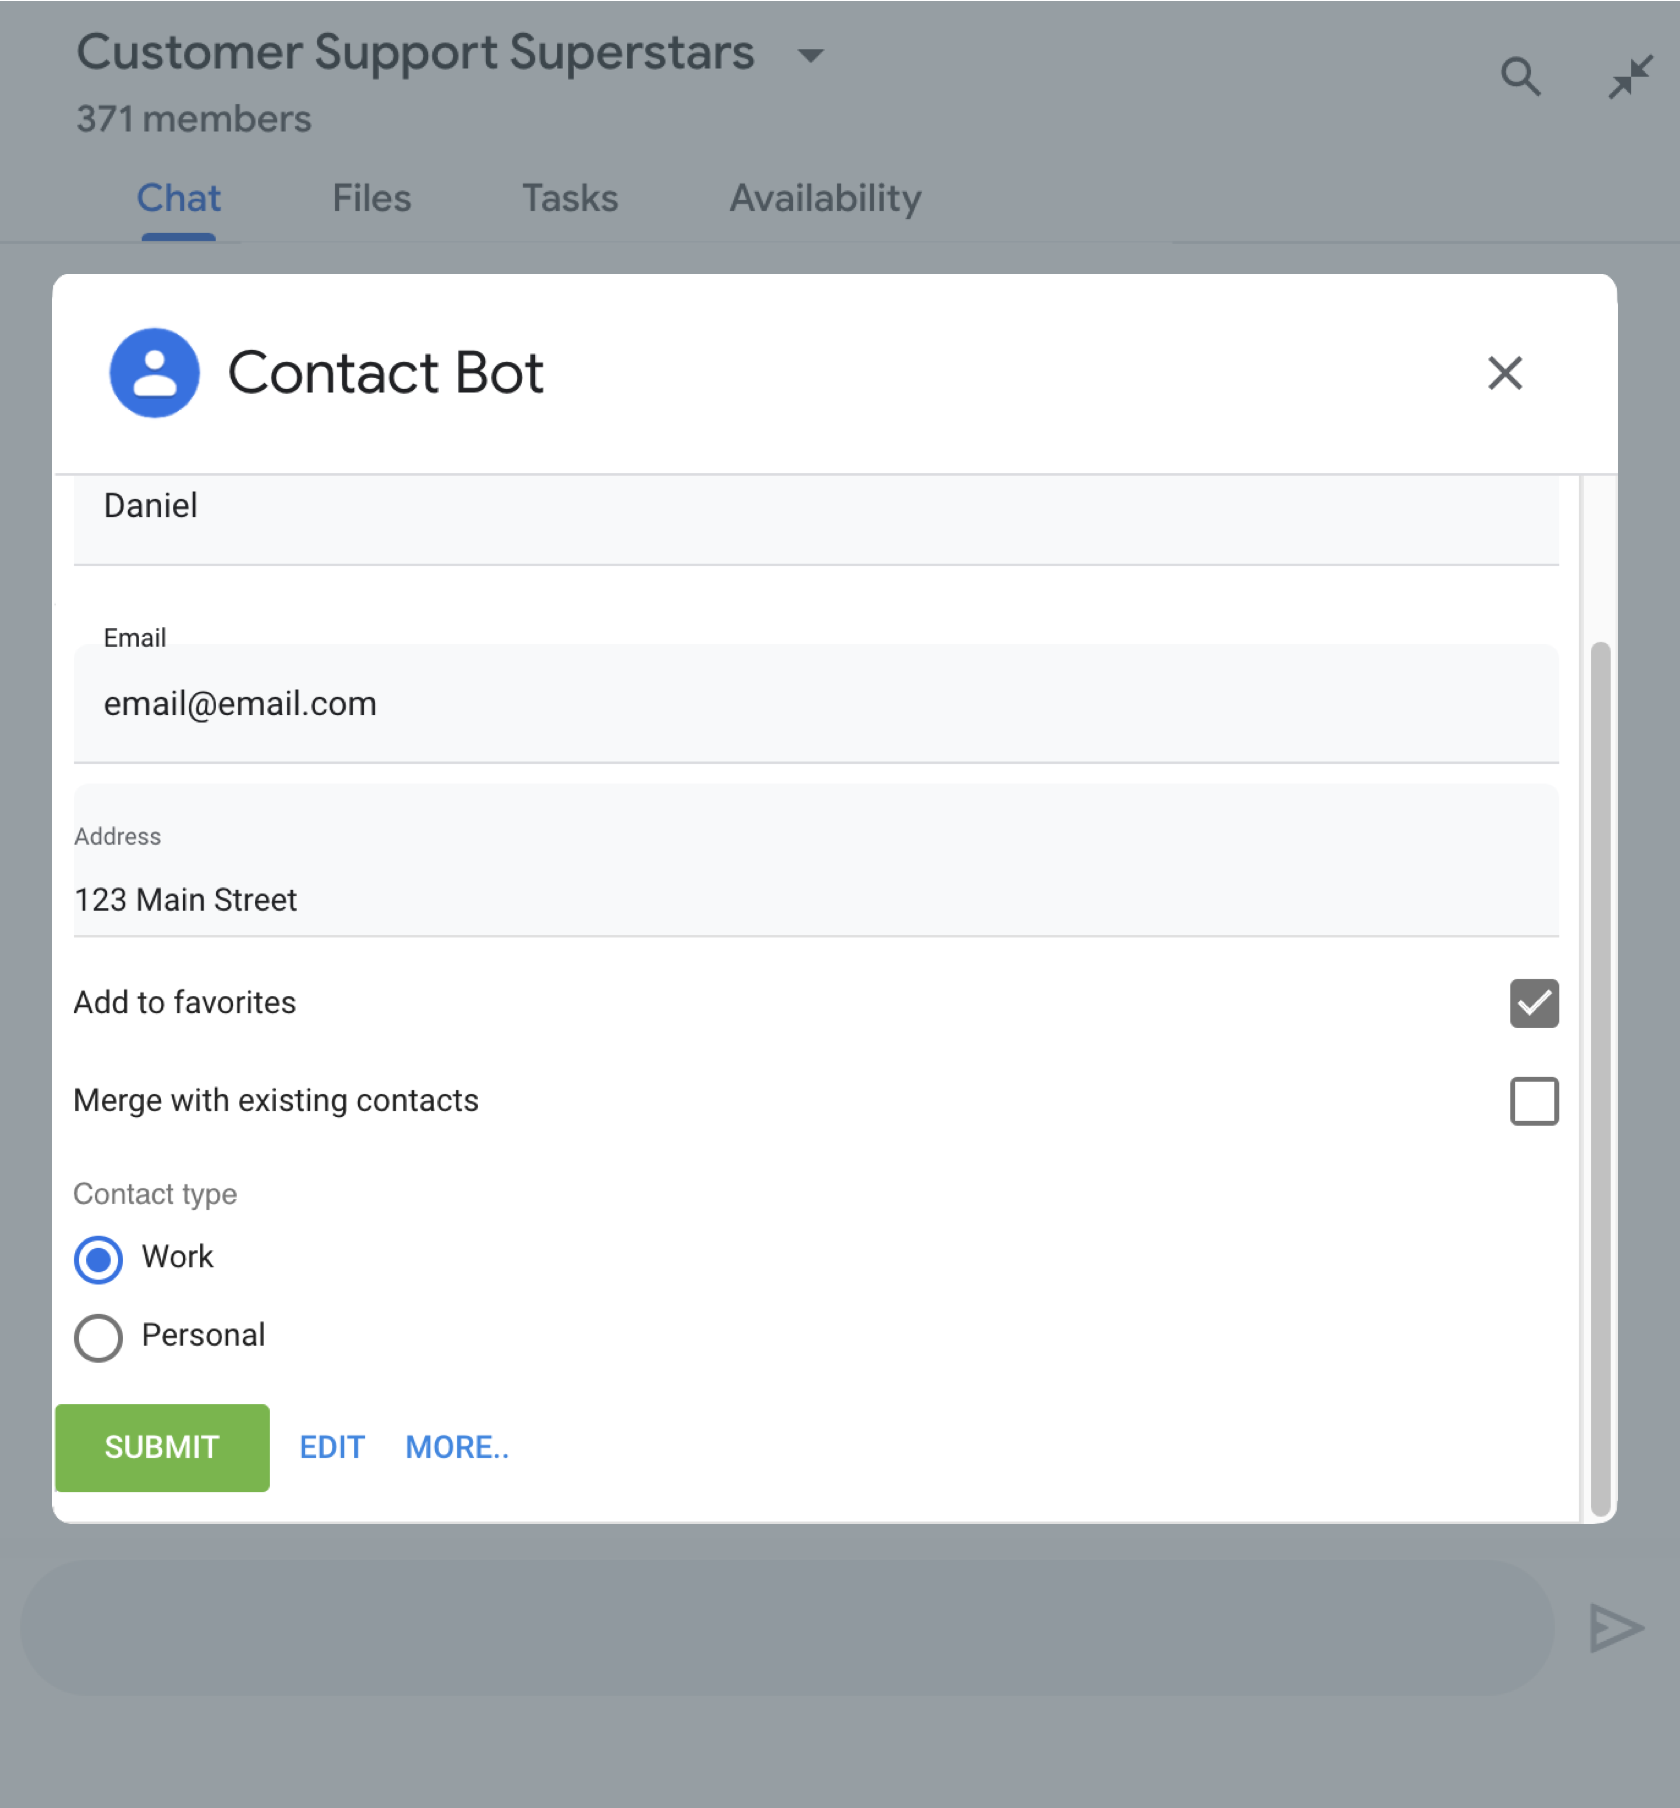 Gathering details about a new contact from a user with a dialog